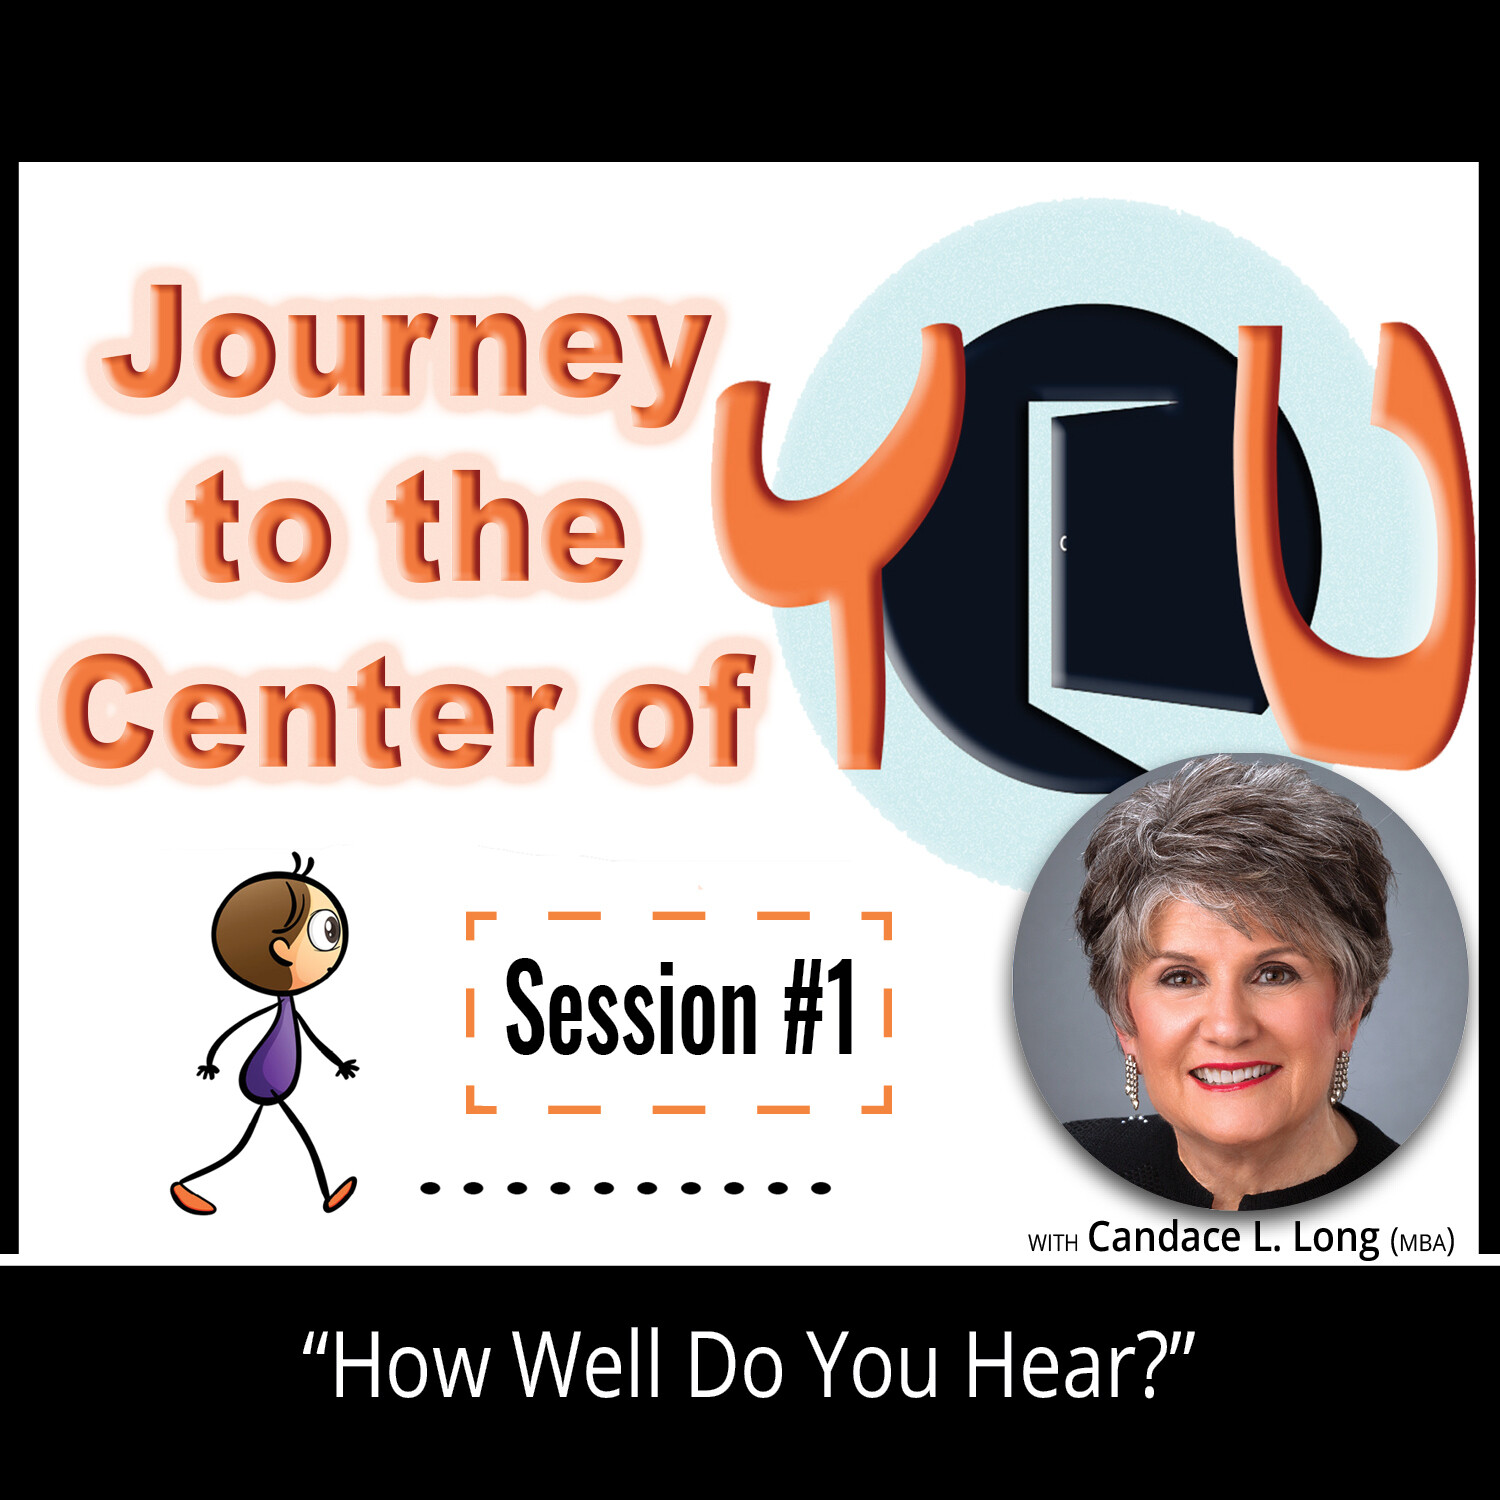 Session #1: HOW WELL DO YOU HEAR?